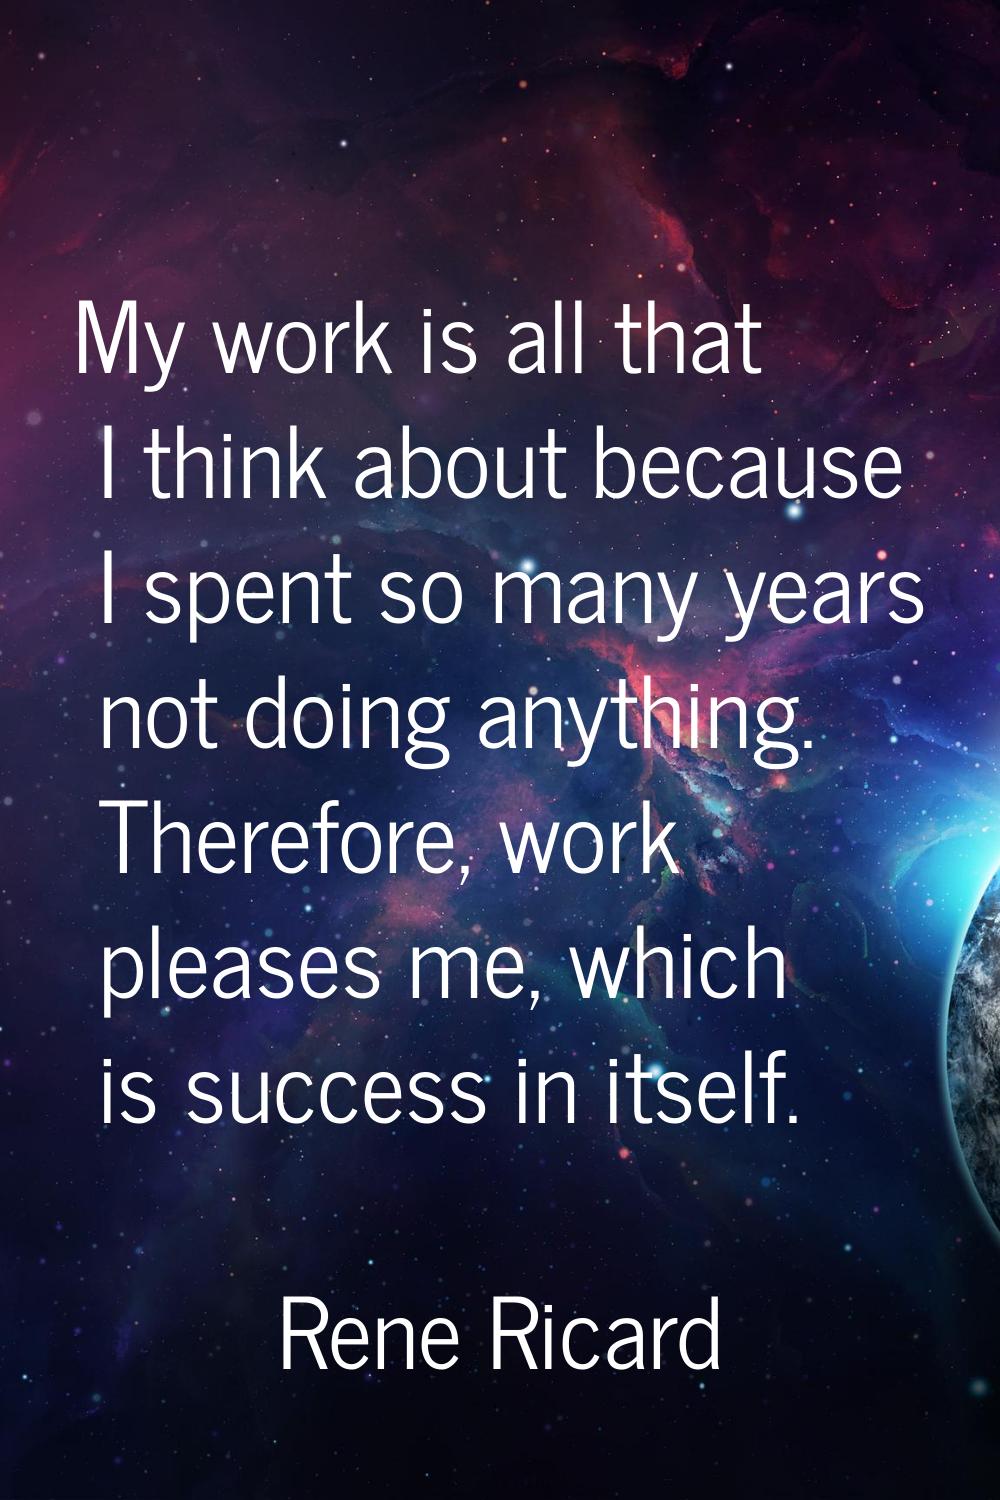 My work is all that I think about because I spent so many years not doing anything. Therefore, work